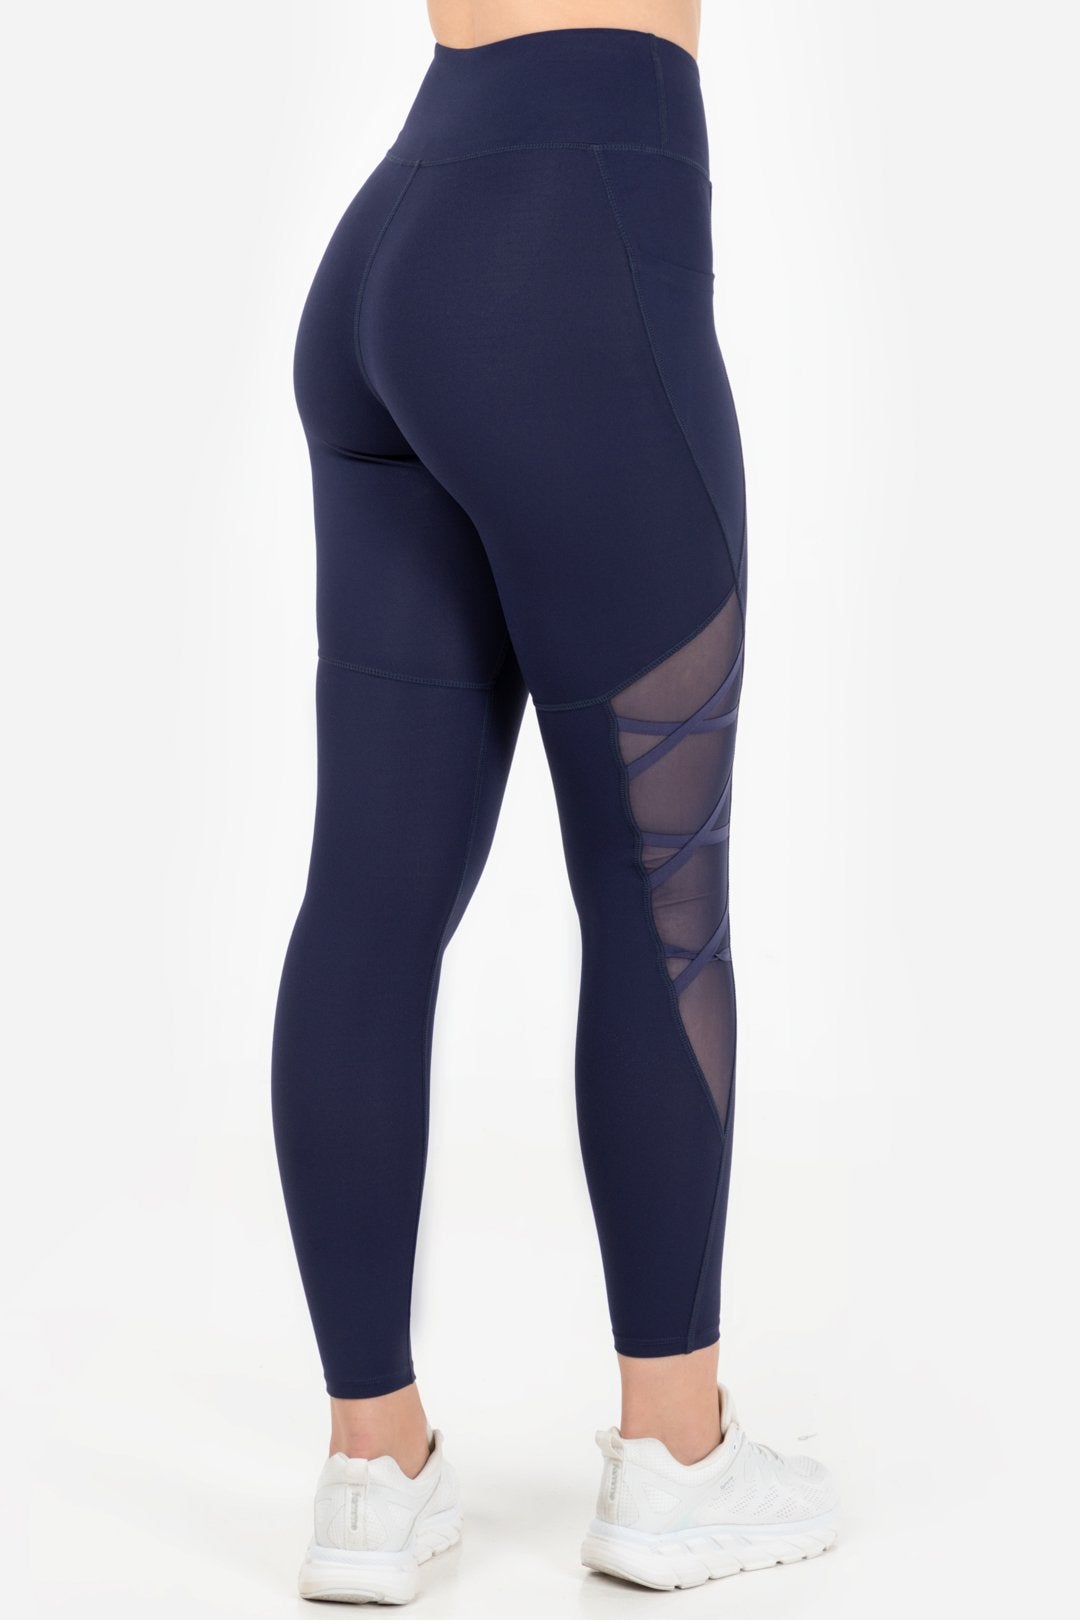 Blue Force Tights - for dame - Famme - Leggings